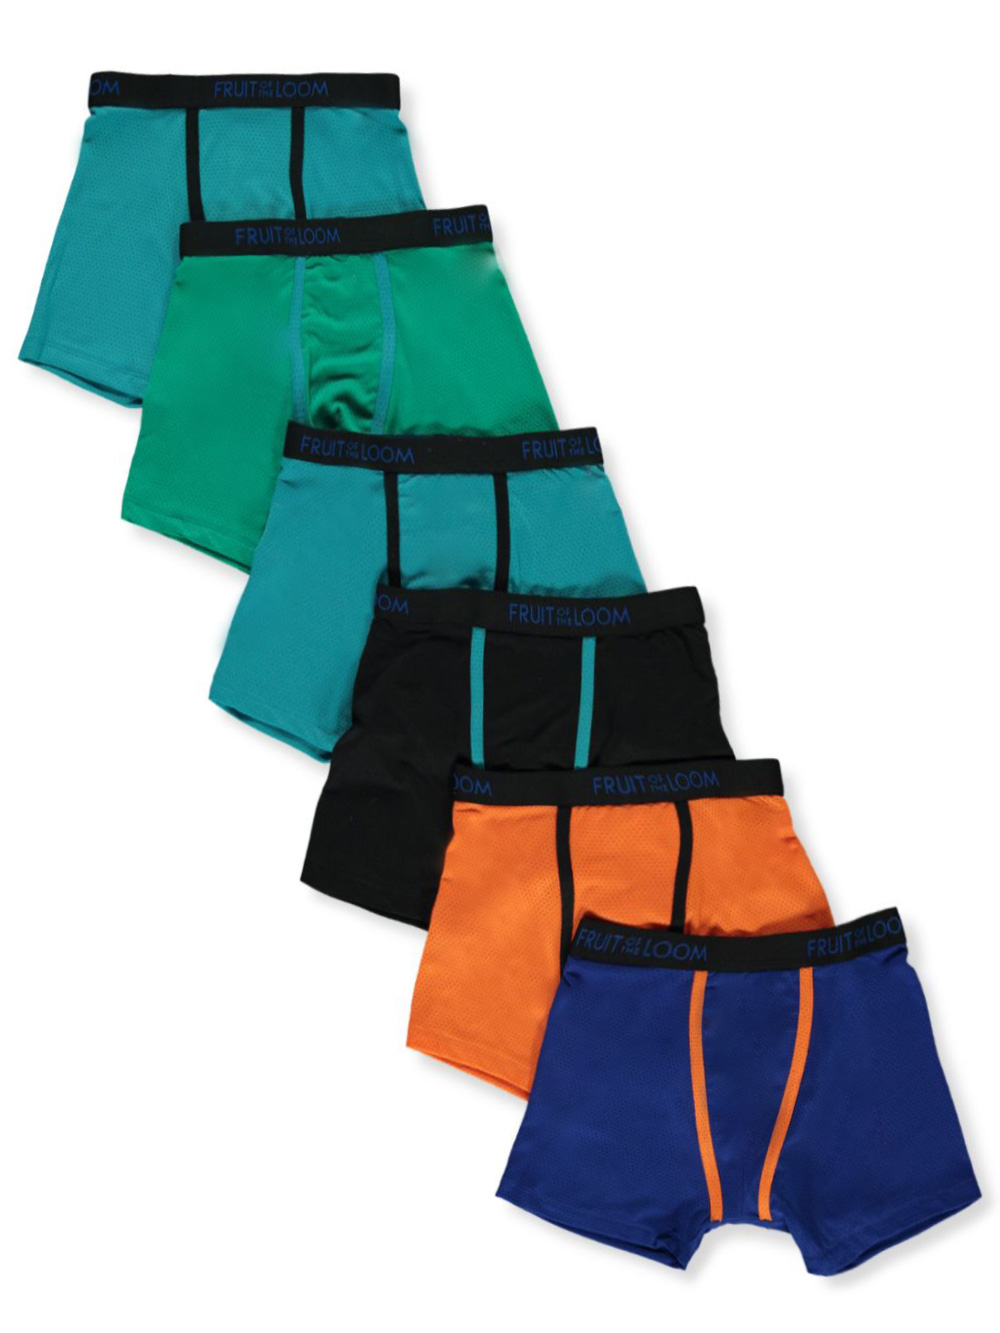 Fruit of the Loom Boys Brief Pack of 6 